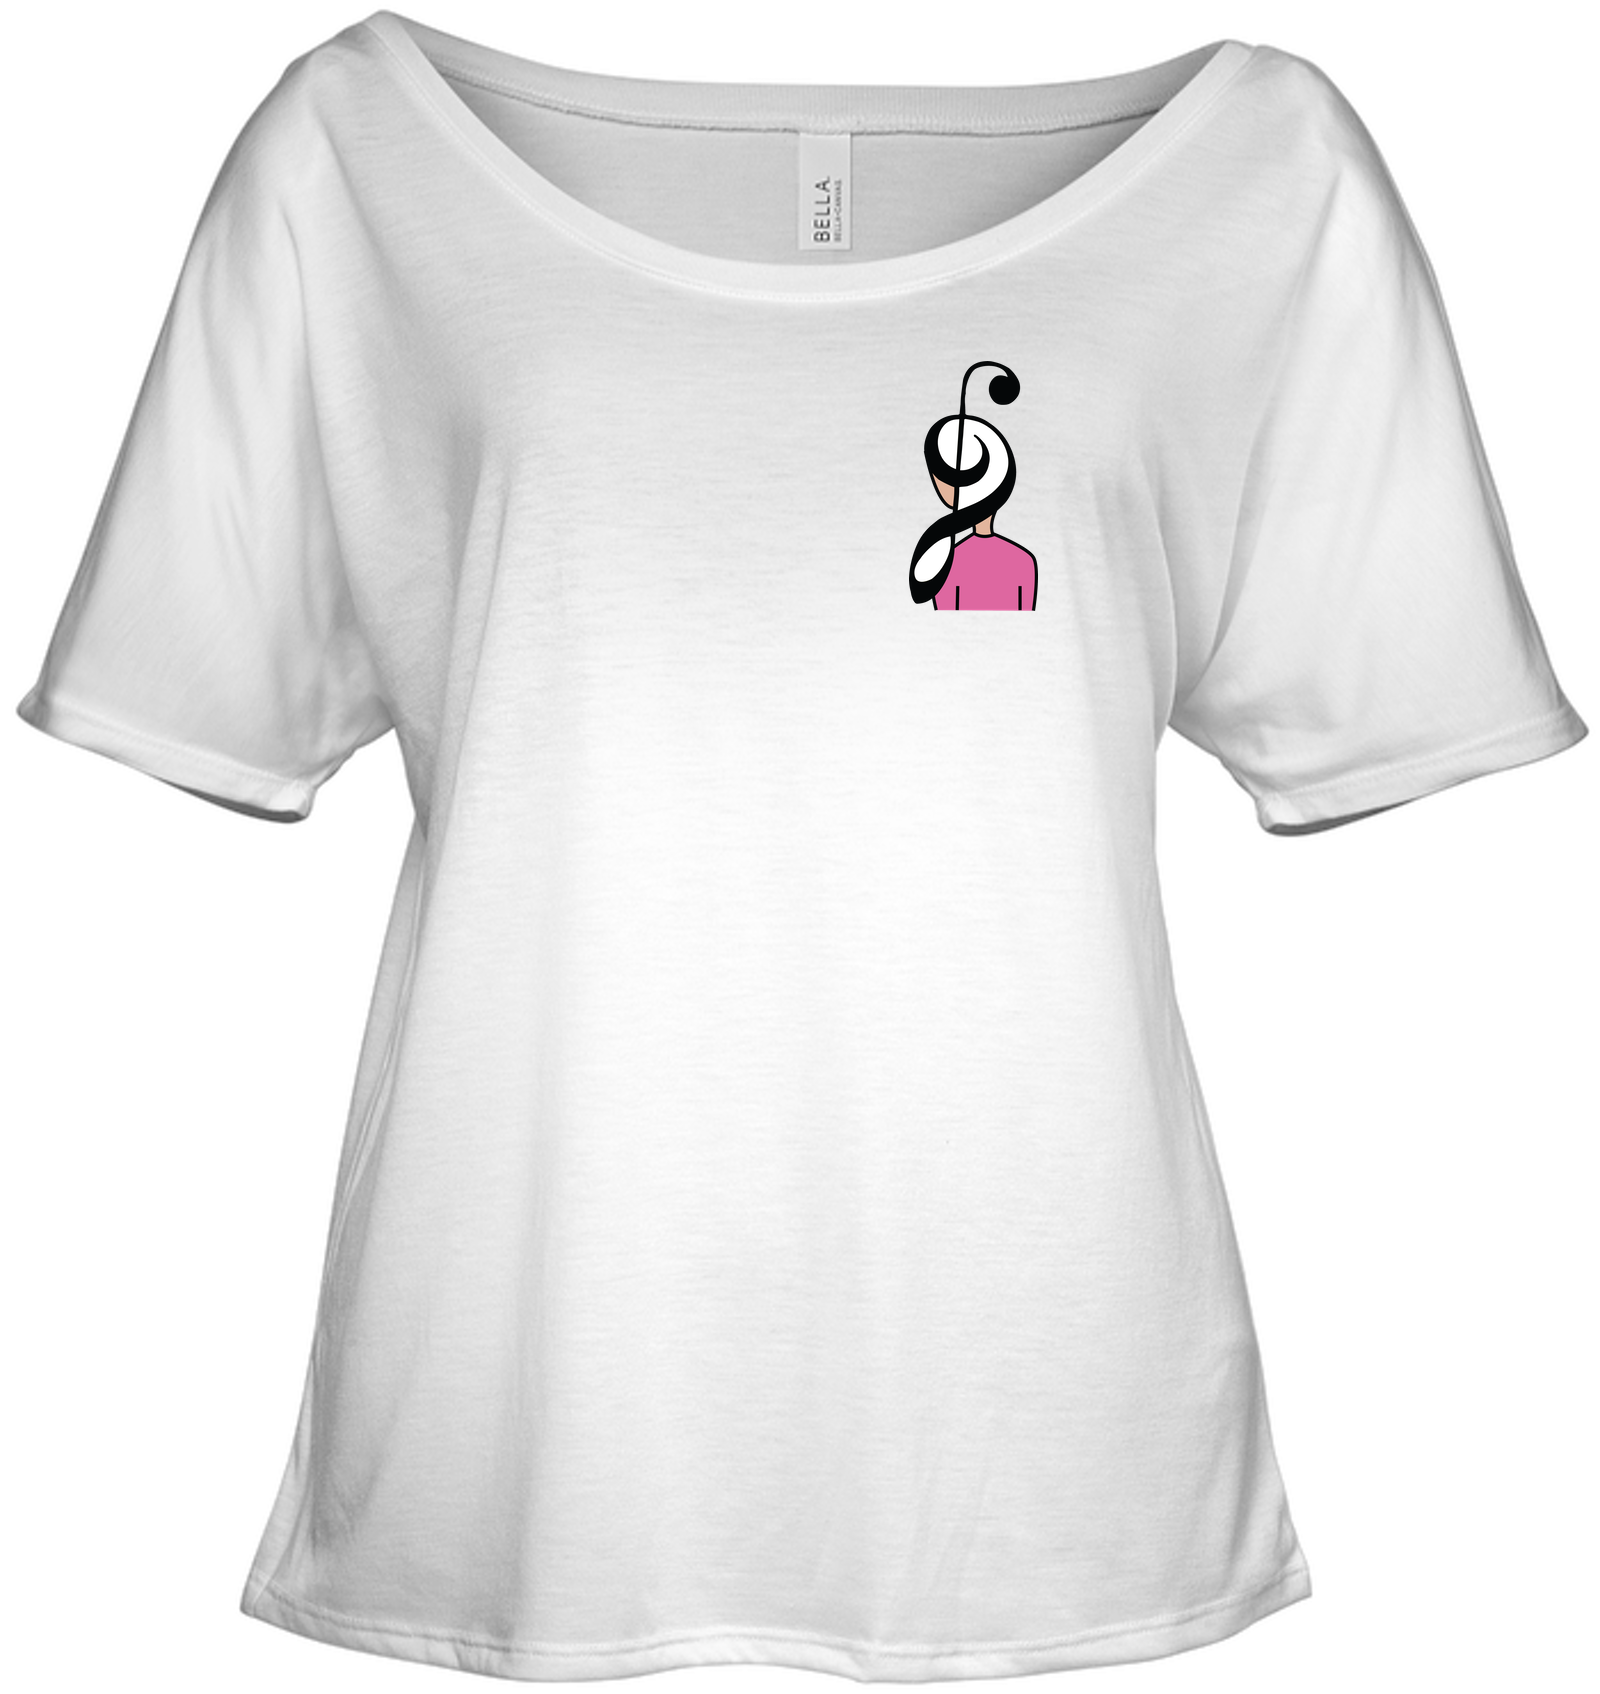 Musical Hairstyle (Pocket Size) - Bella + Canvas Women's Slouchy Tee